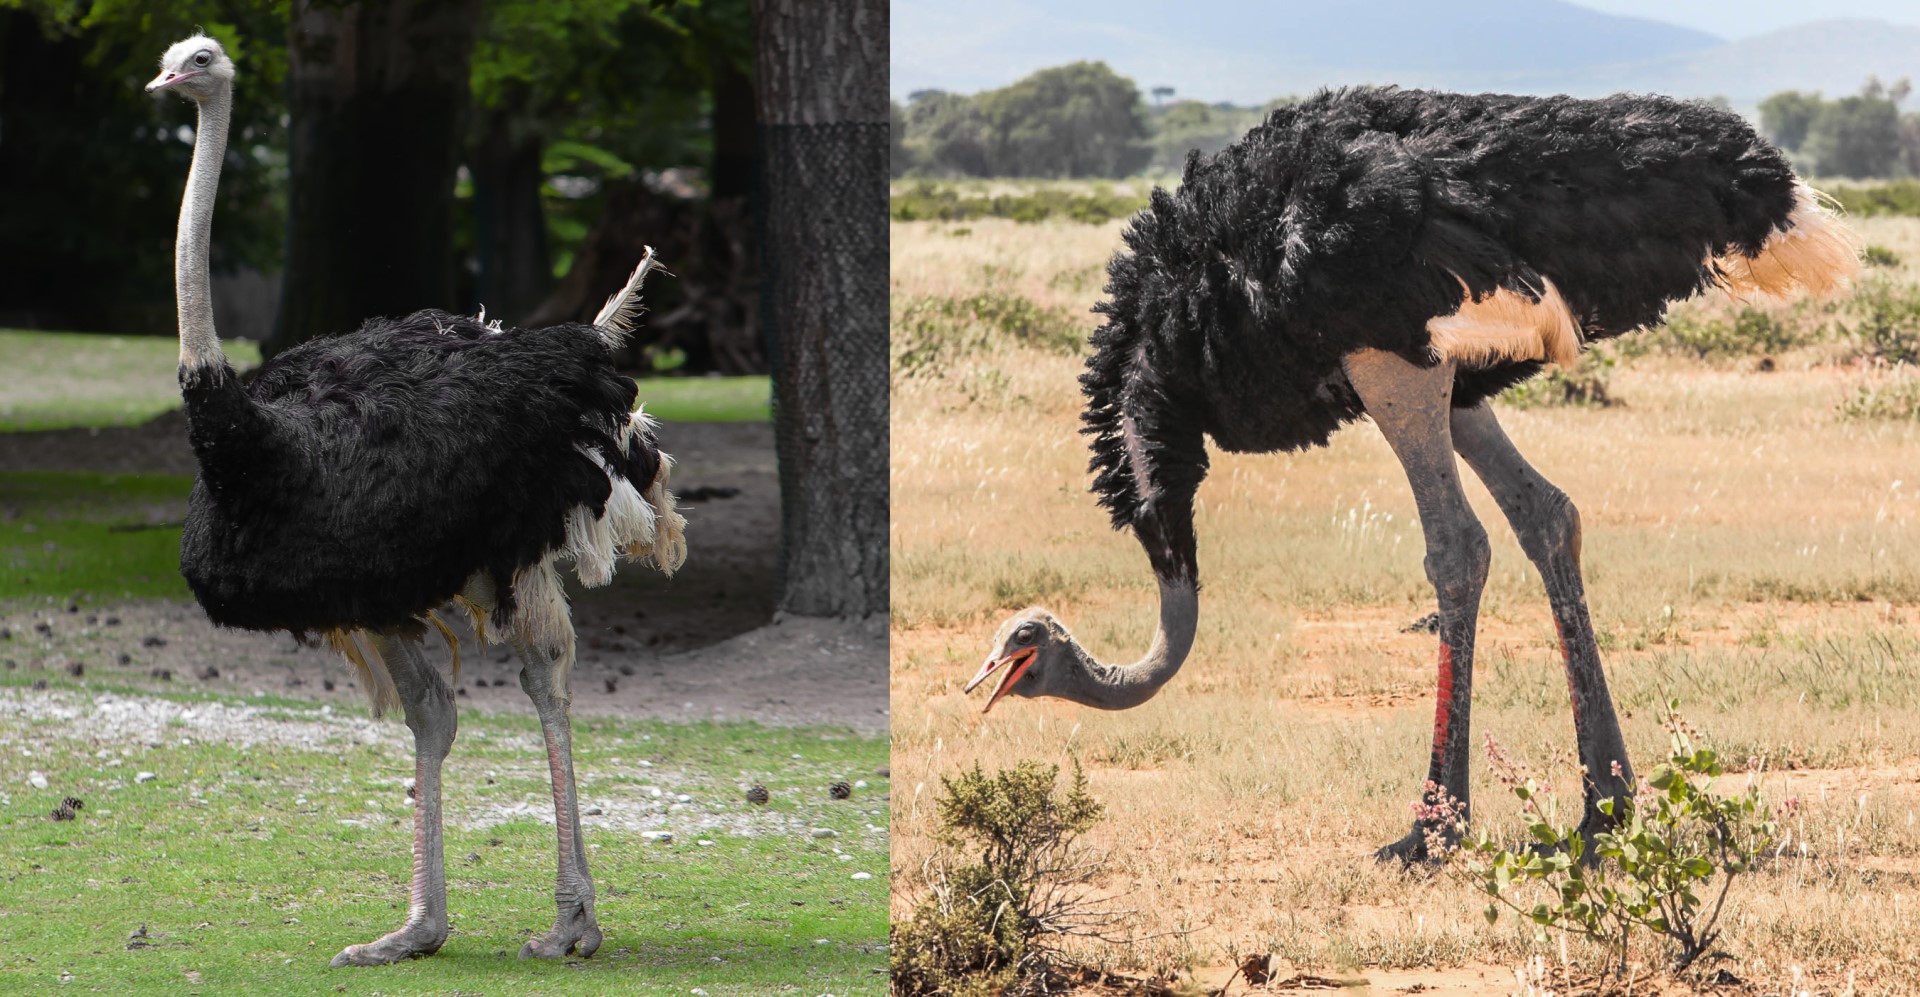 Both ostrich species Combined PaleoNeolithic photo credit Diego Delso&Ninara